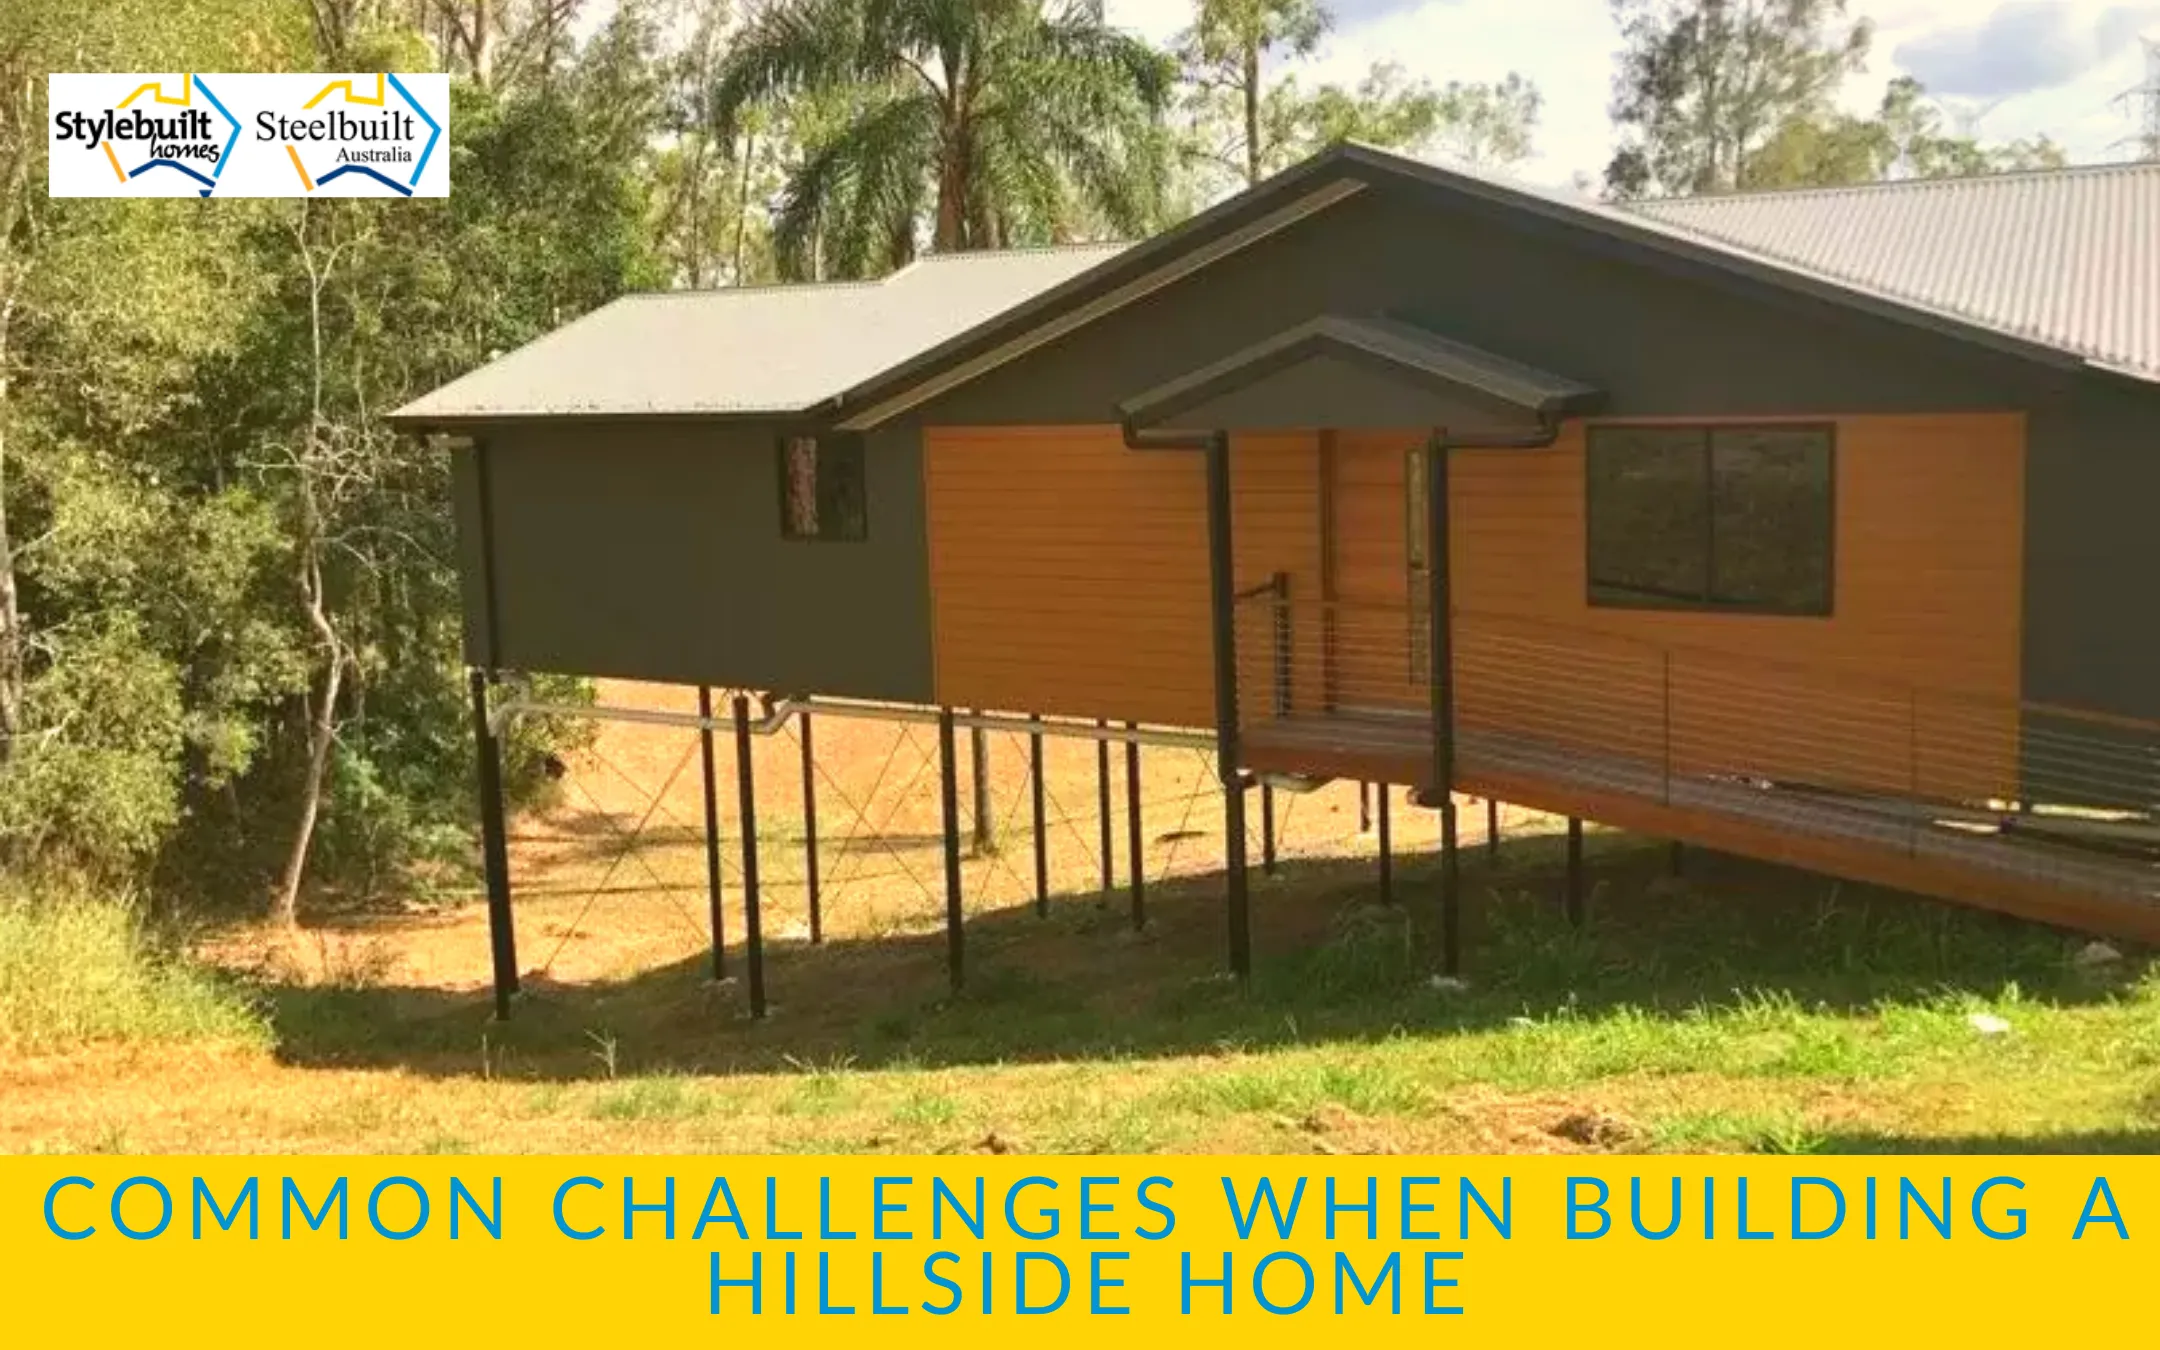 Common Challenges When Building a Hillside Home